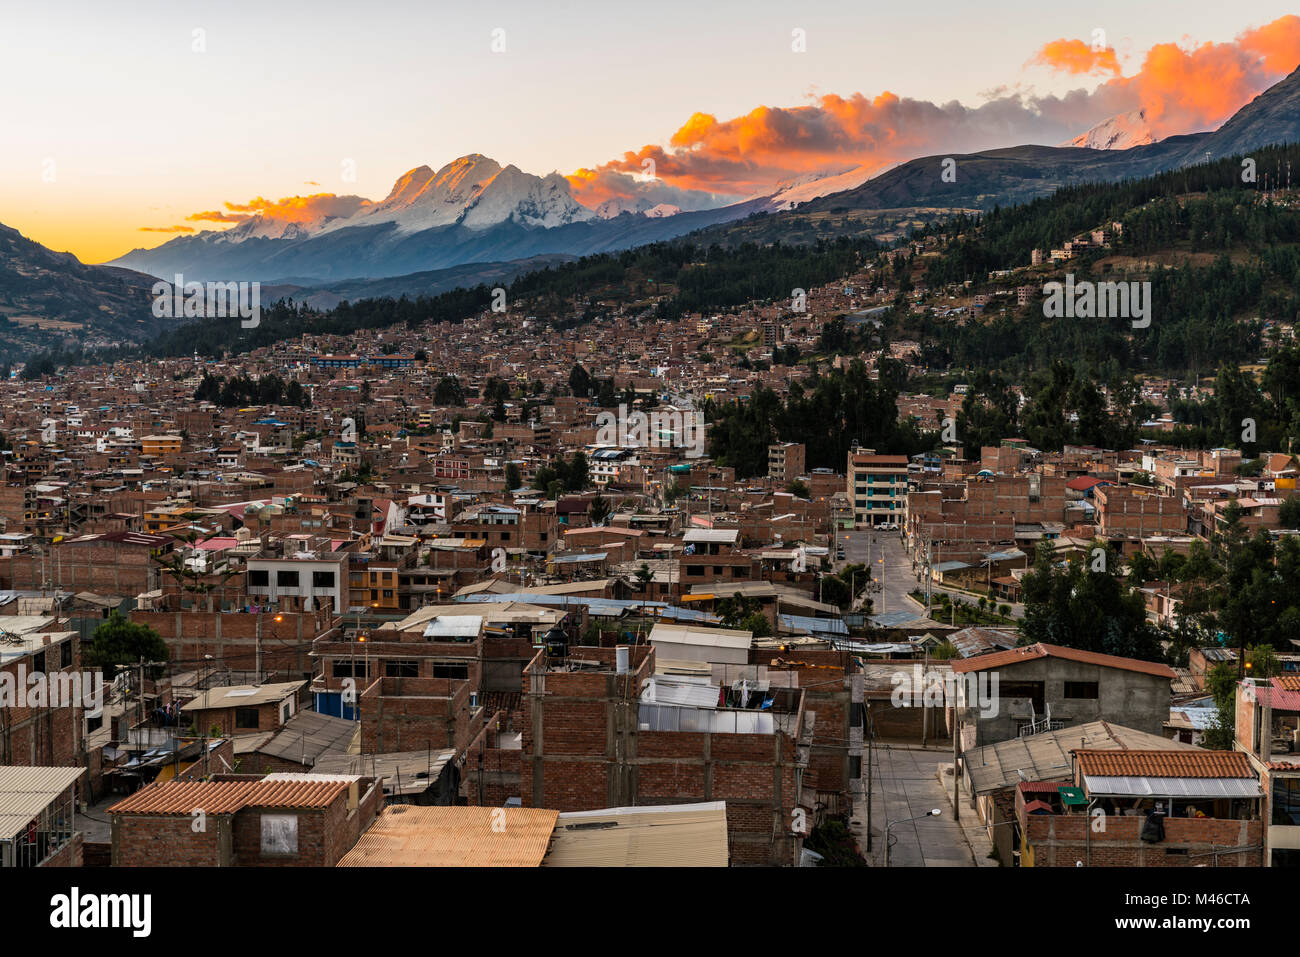 A panoramic view of the South American city of Huaraz, Peru with the Cordillera Blanca mountain range in the background. Stock Photo